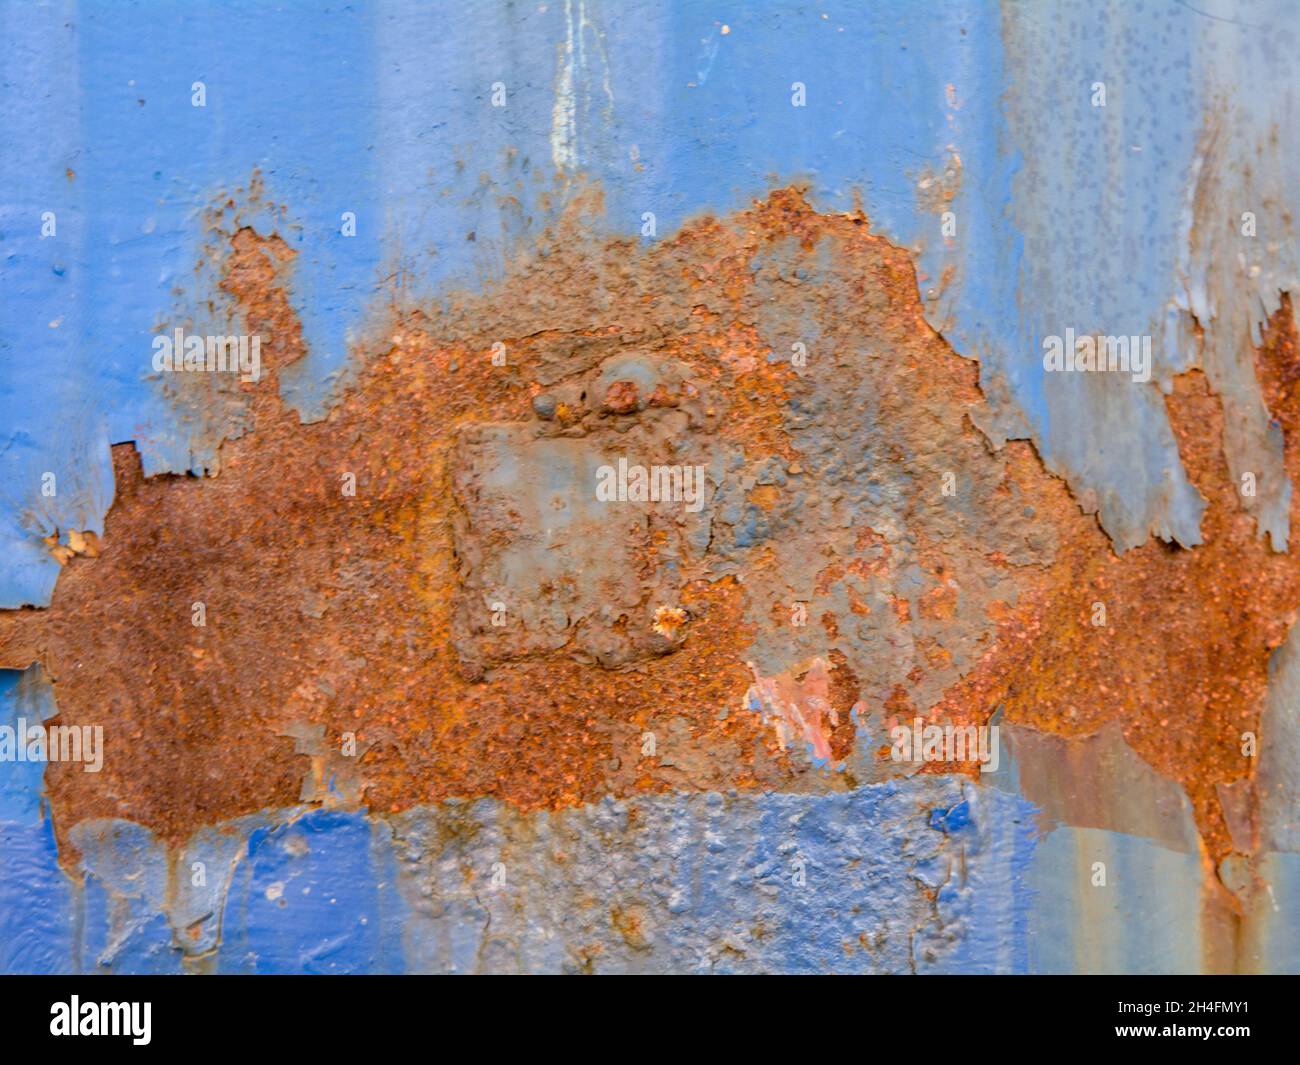 Rusted surface of blue metal shield Stock Photo